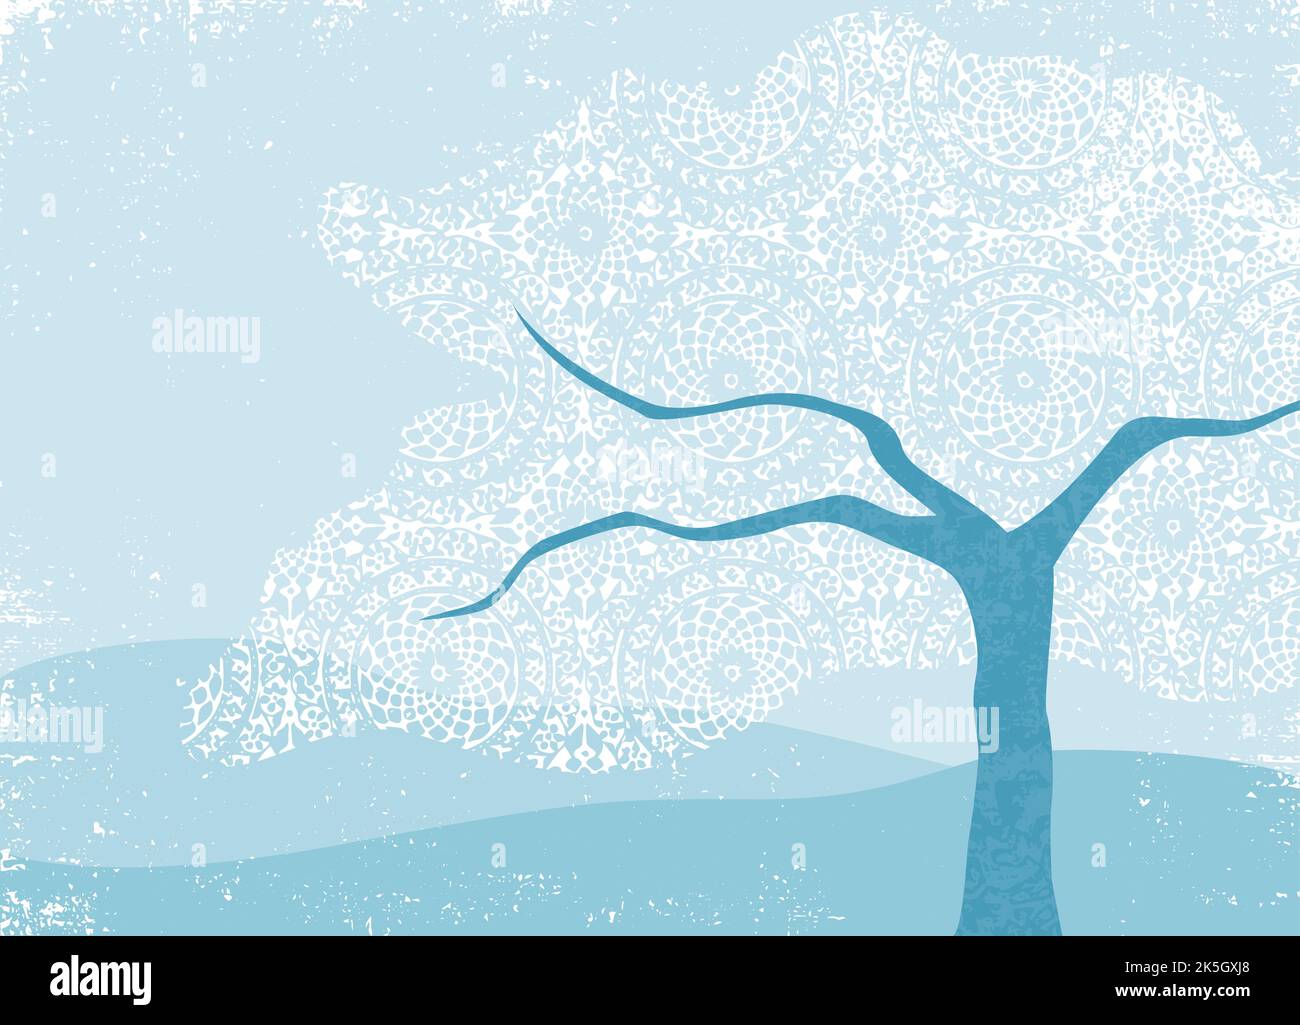 An abstract landscape with lacey canopy tree, in a cut paper style with textures Stock Vector